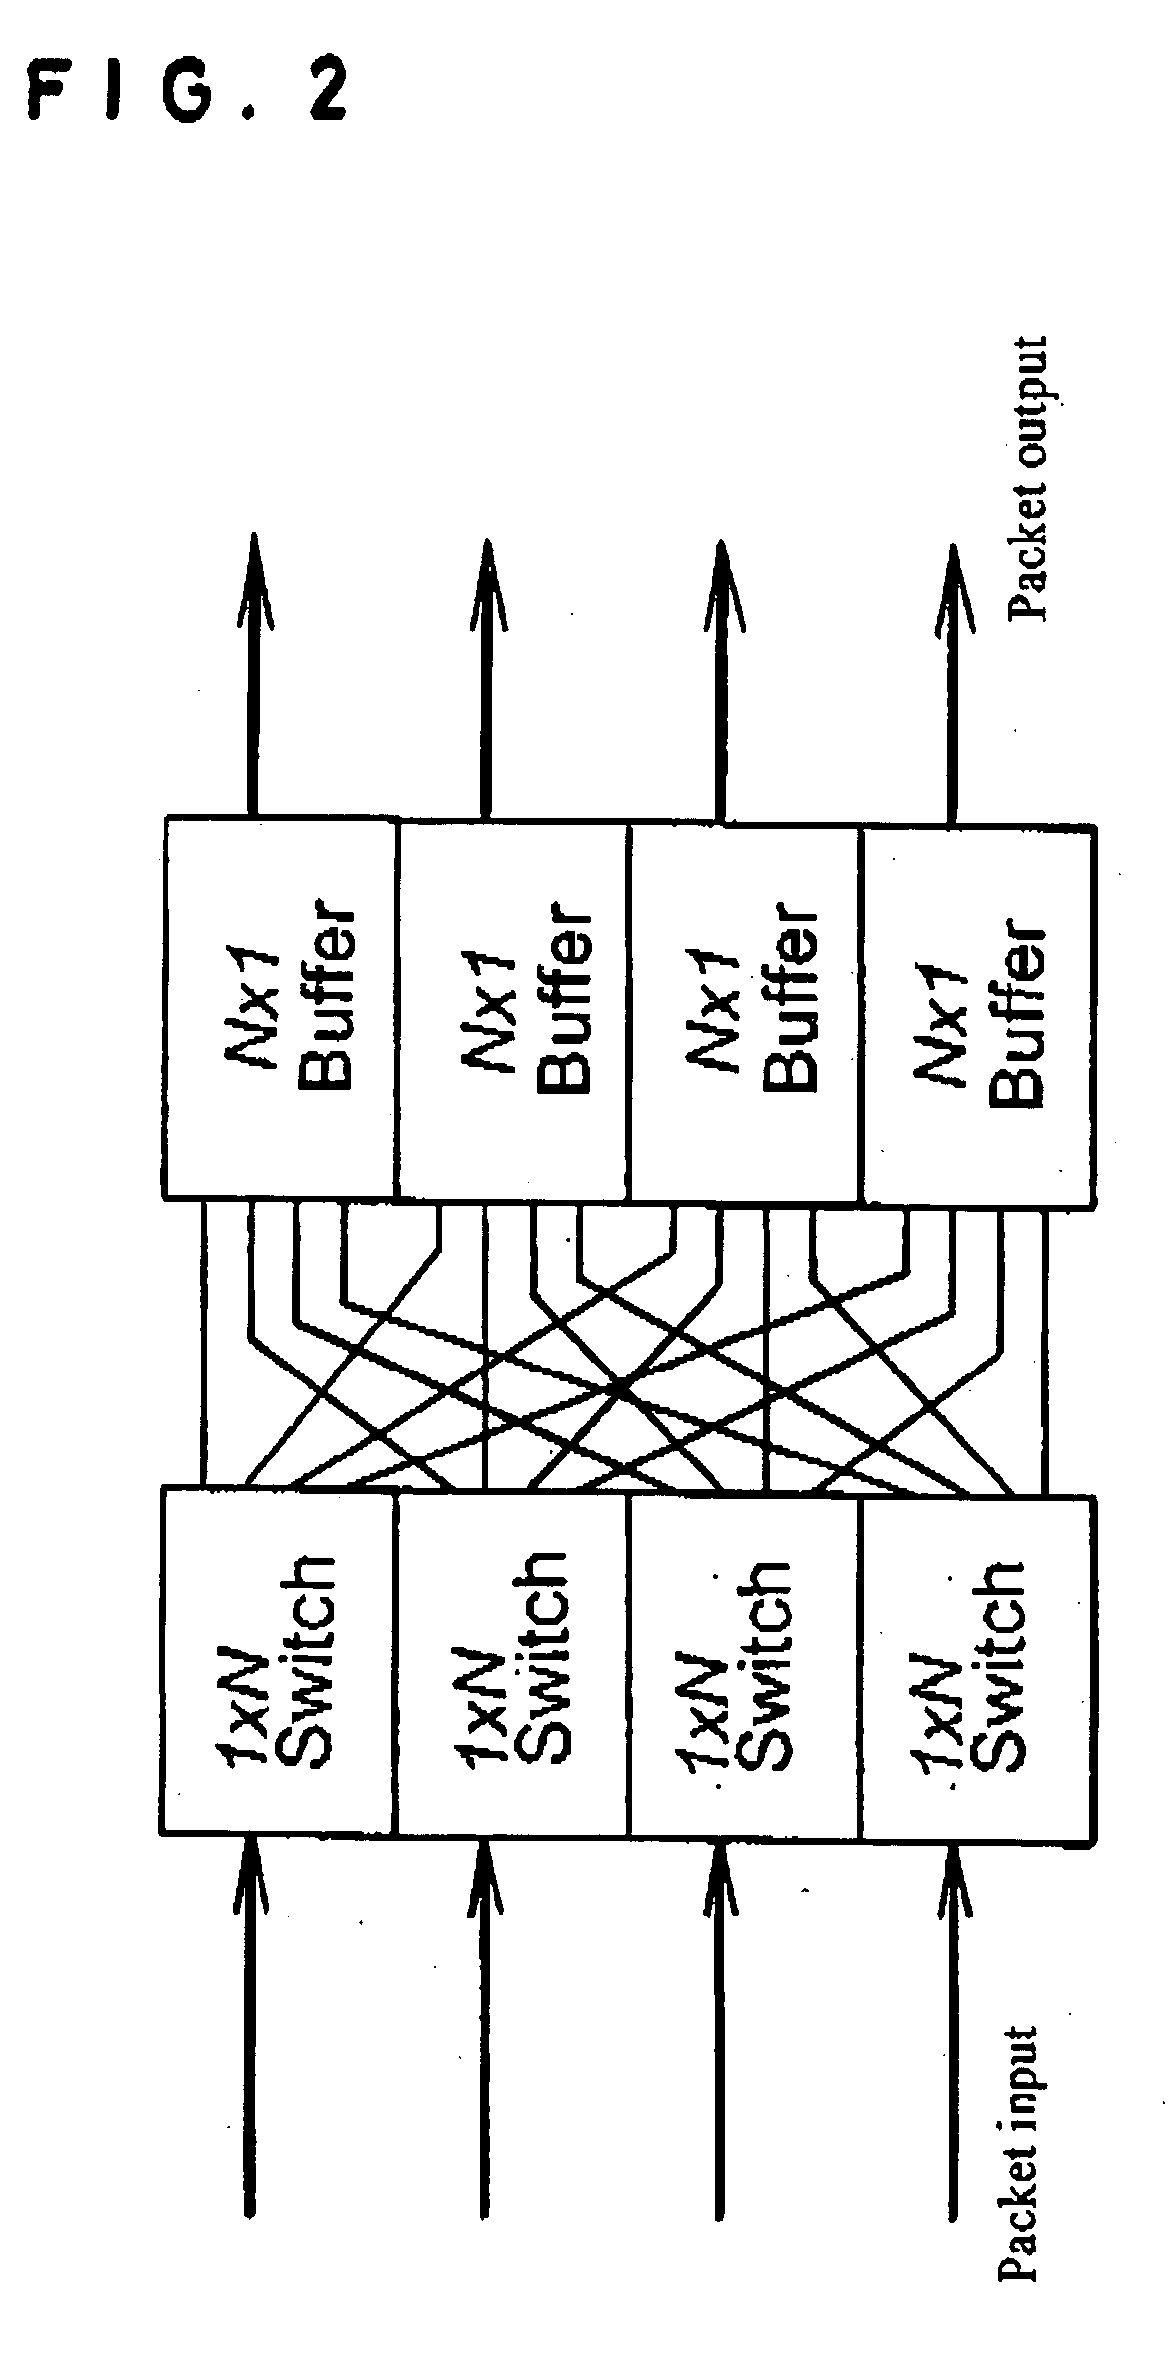 Optical packet buffering device and buffering method thereof